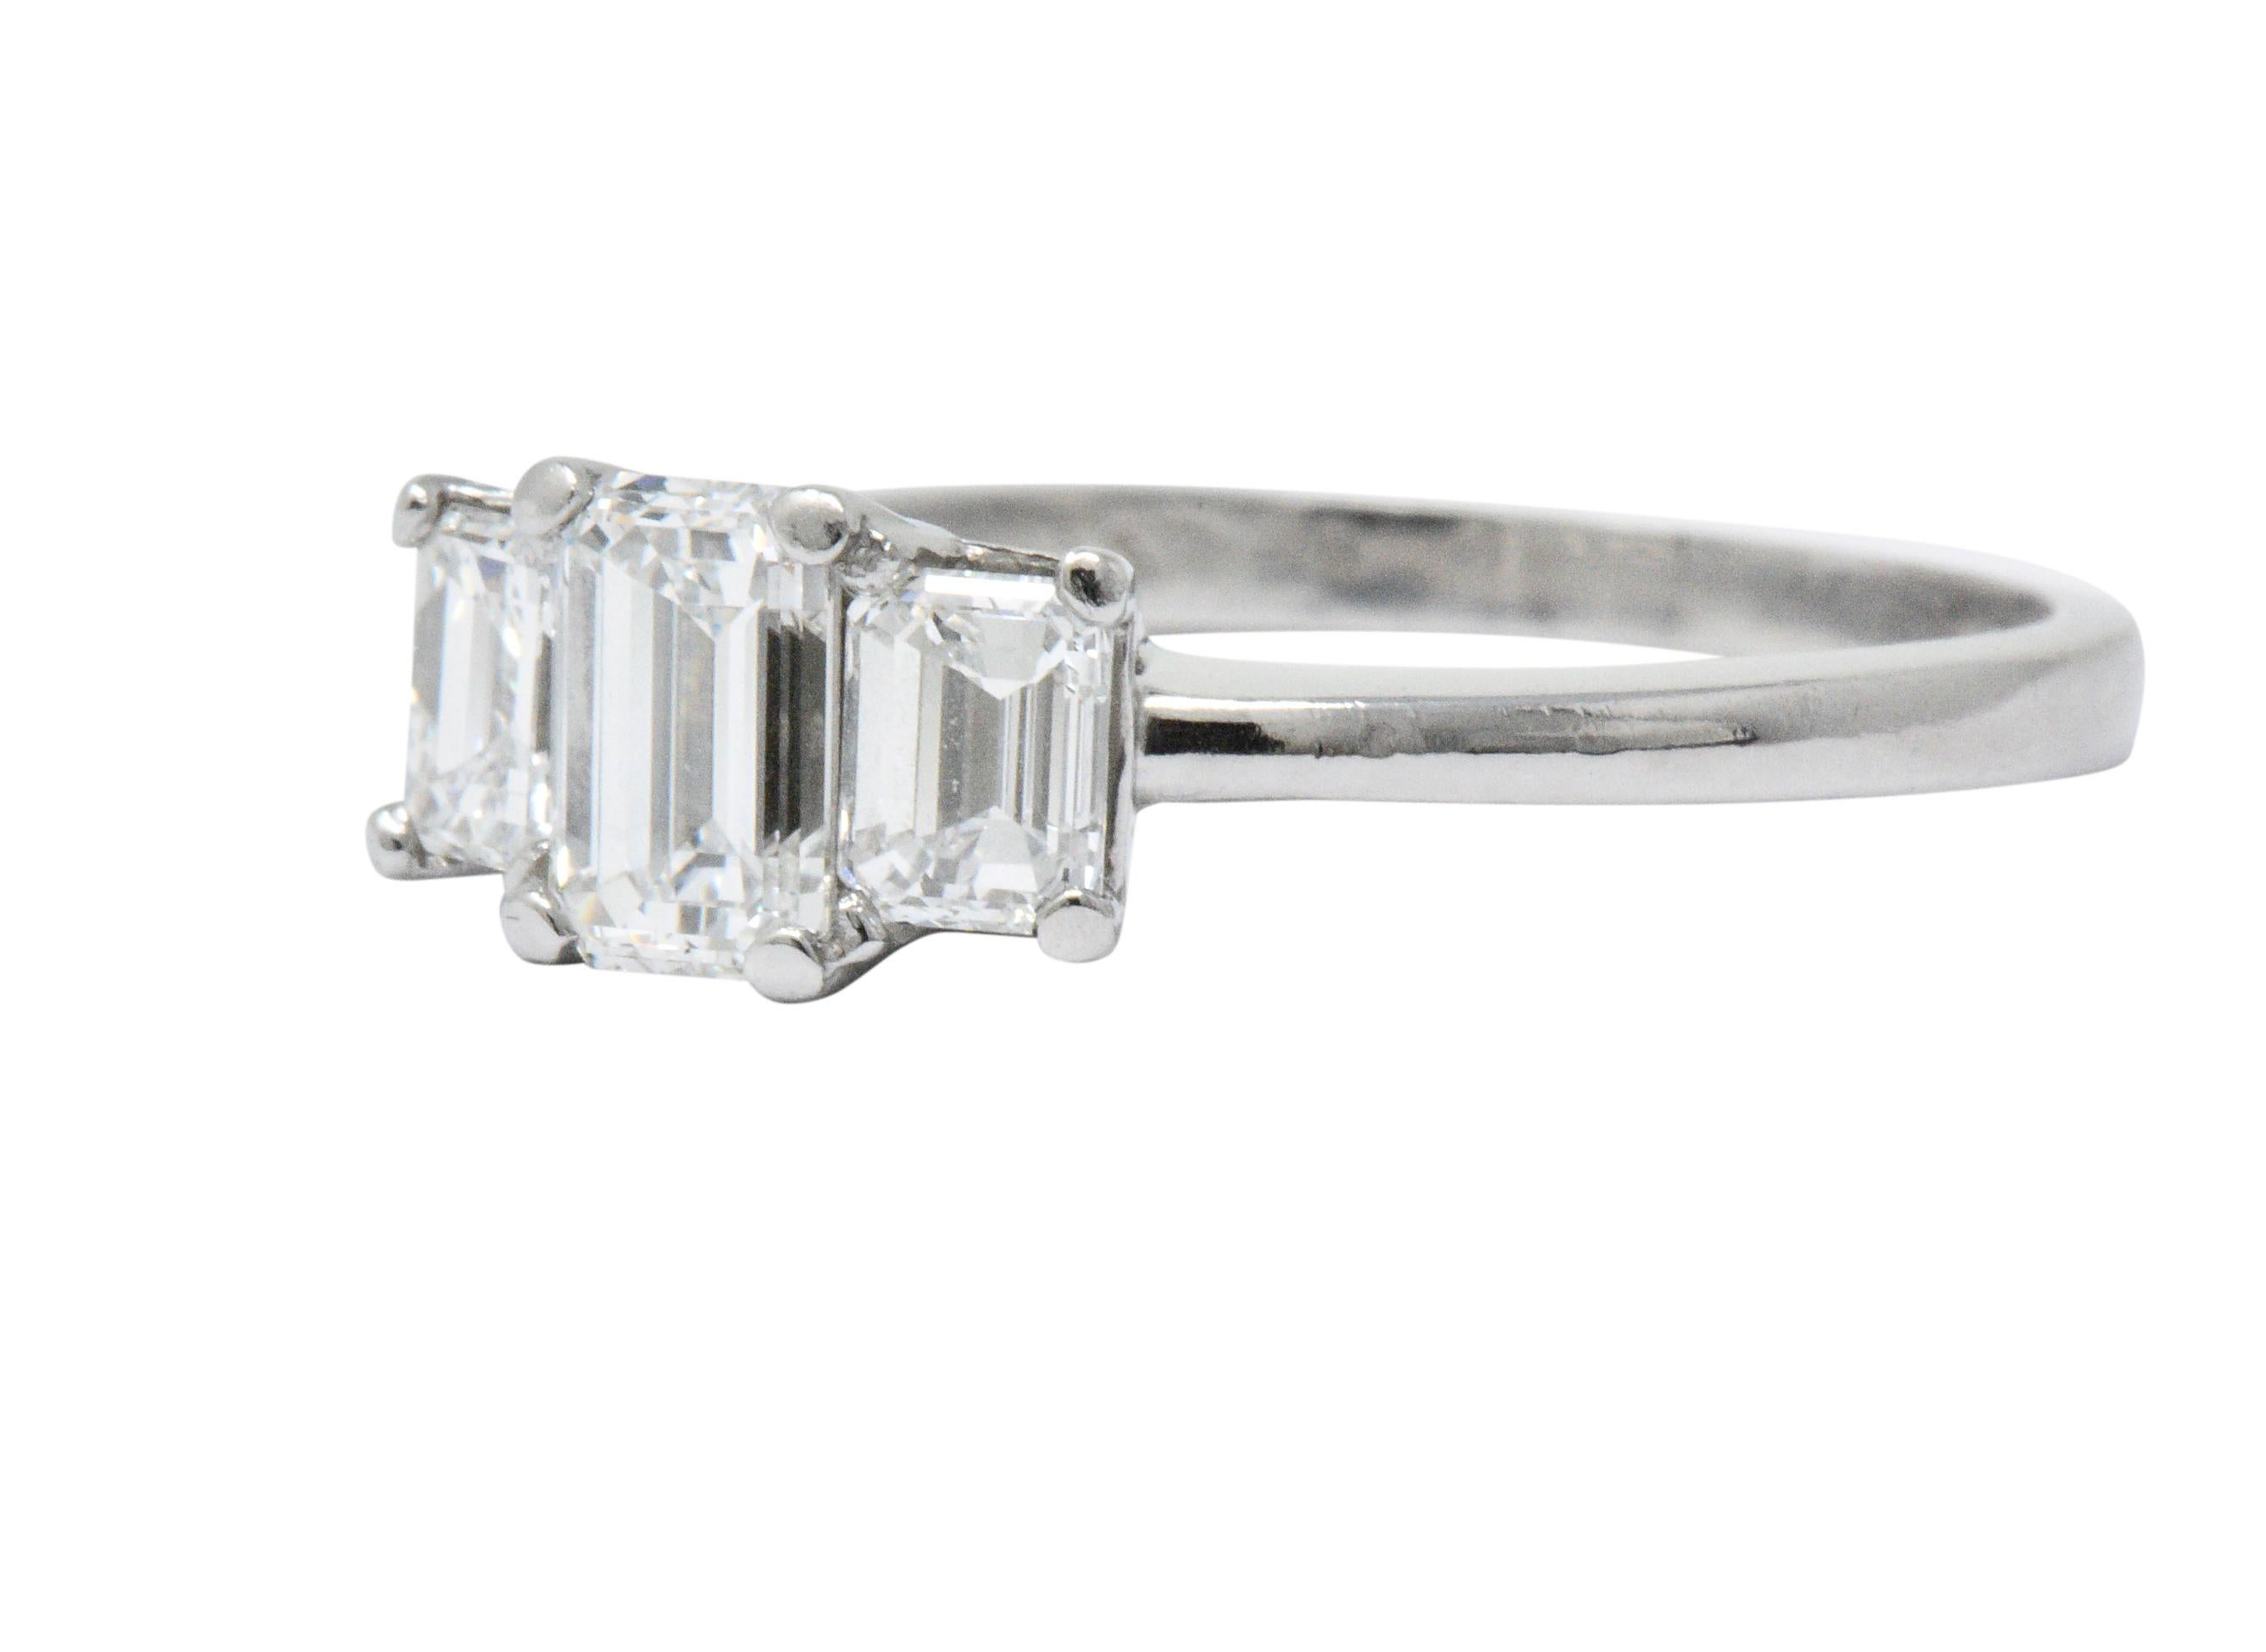 Designed as a three stone basket style ring centering an emerald cut diamond weighing approximately 0.70 carat, G color with VS clarity

Flanked by two more emerald cut diamonds weighing in total approximately 0.70 carat, F/G color with VS